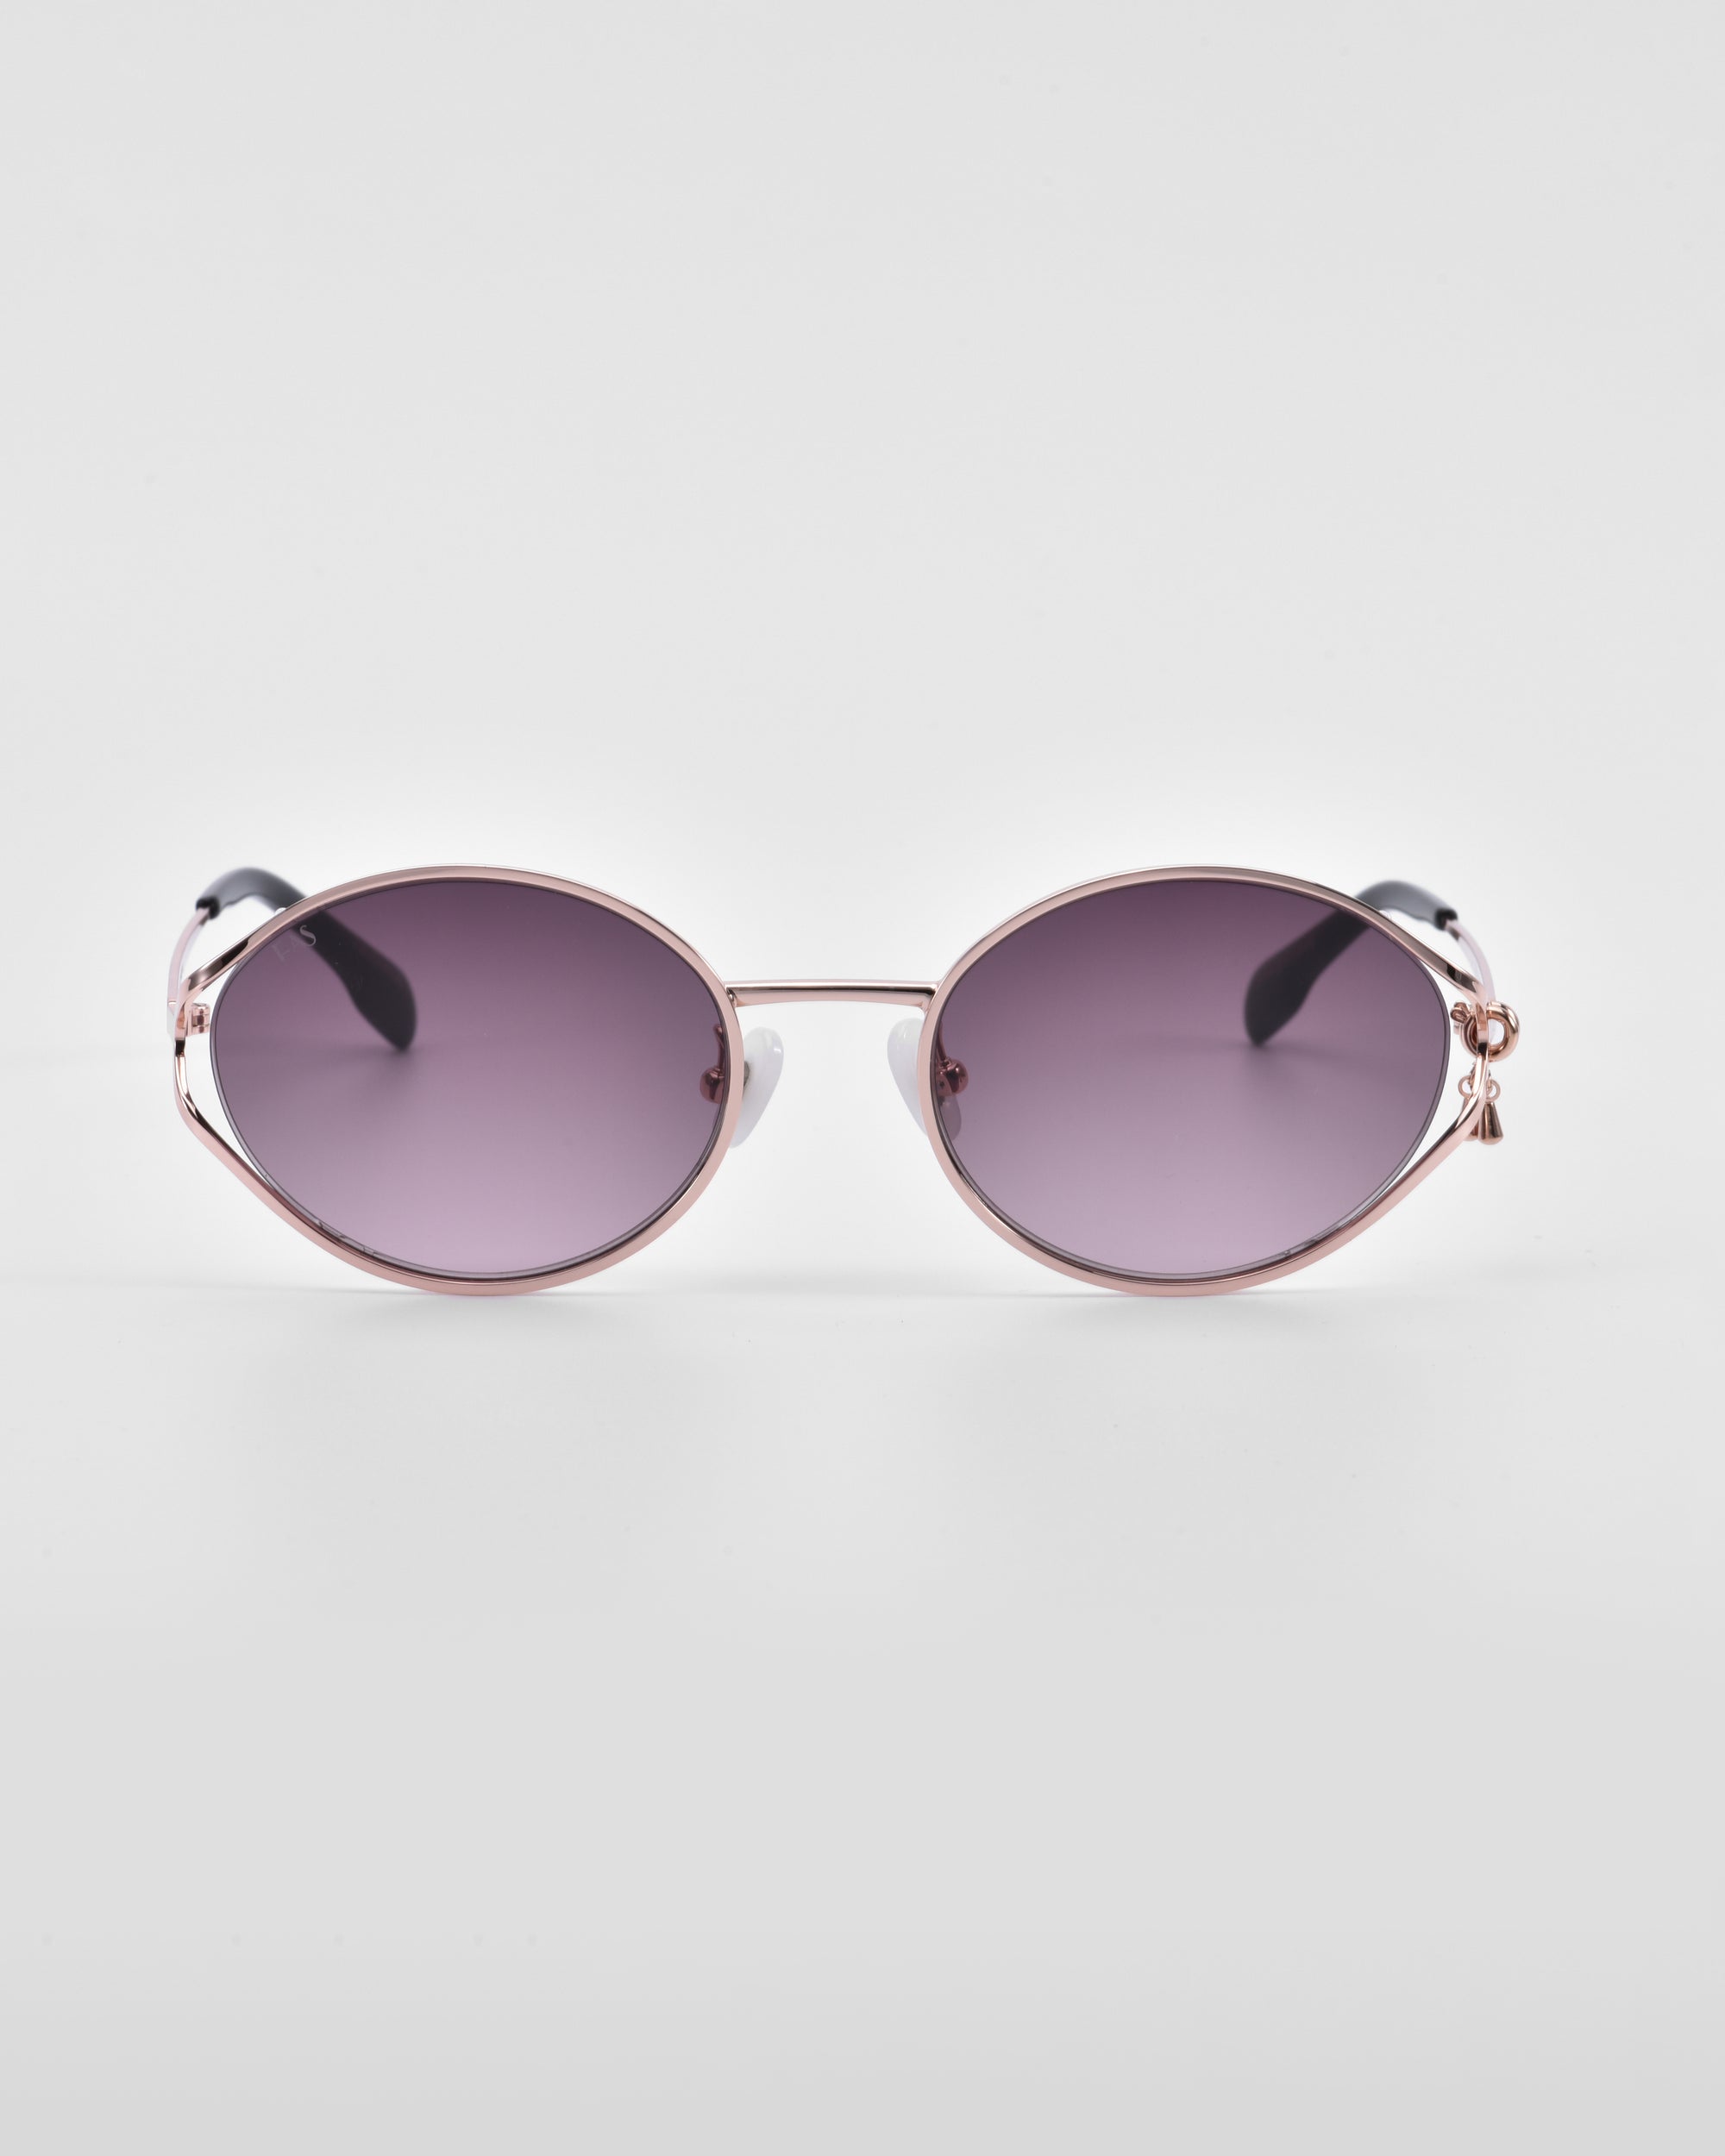 A pair of 'Sky' sunglasses from For Art's Sake® with dark lenses and thin metallic frames. The arms are also metallic with black tips, and the nose pads are crafted from natural jade-stone. The background is plain white.